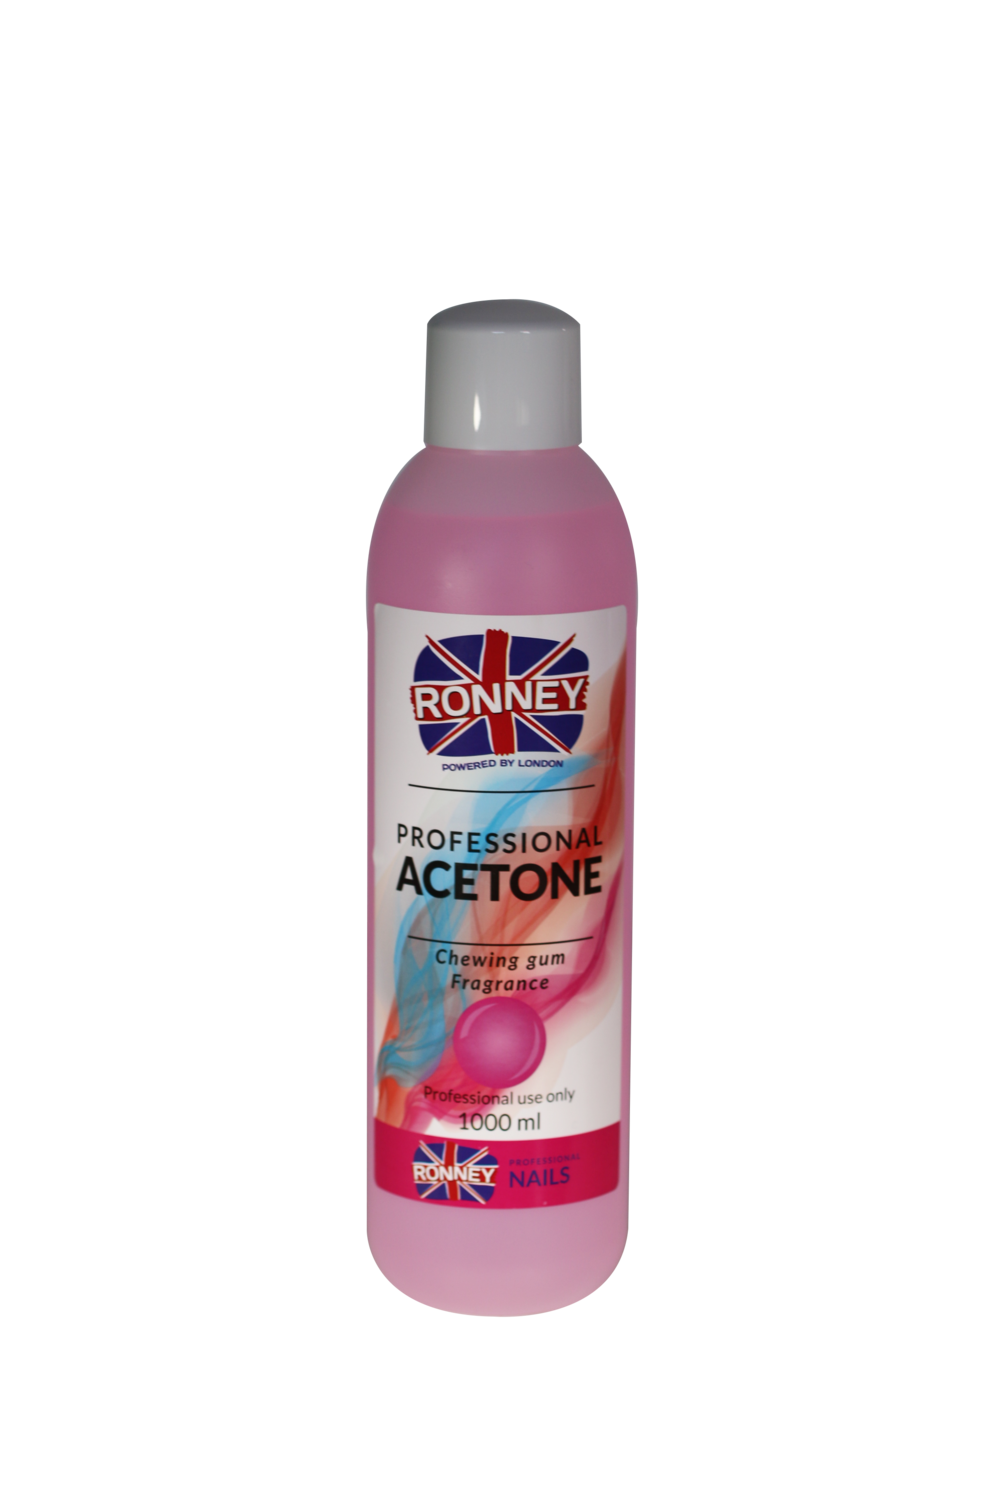 RONNEY Professional Acetone Chewing Gum Fragrance 1000 ml